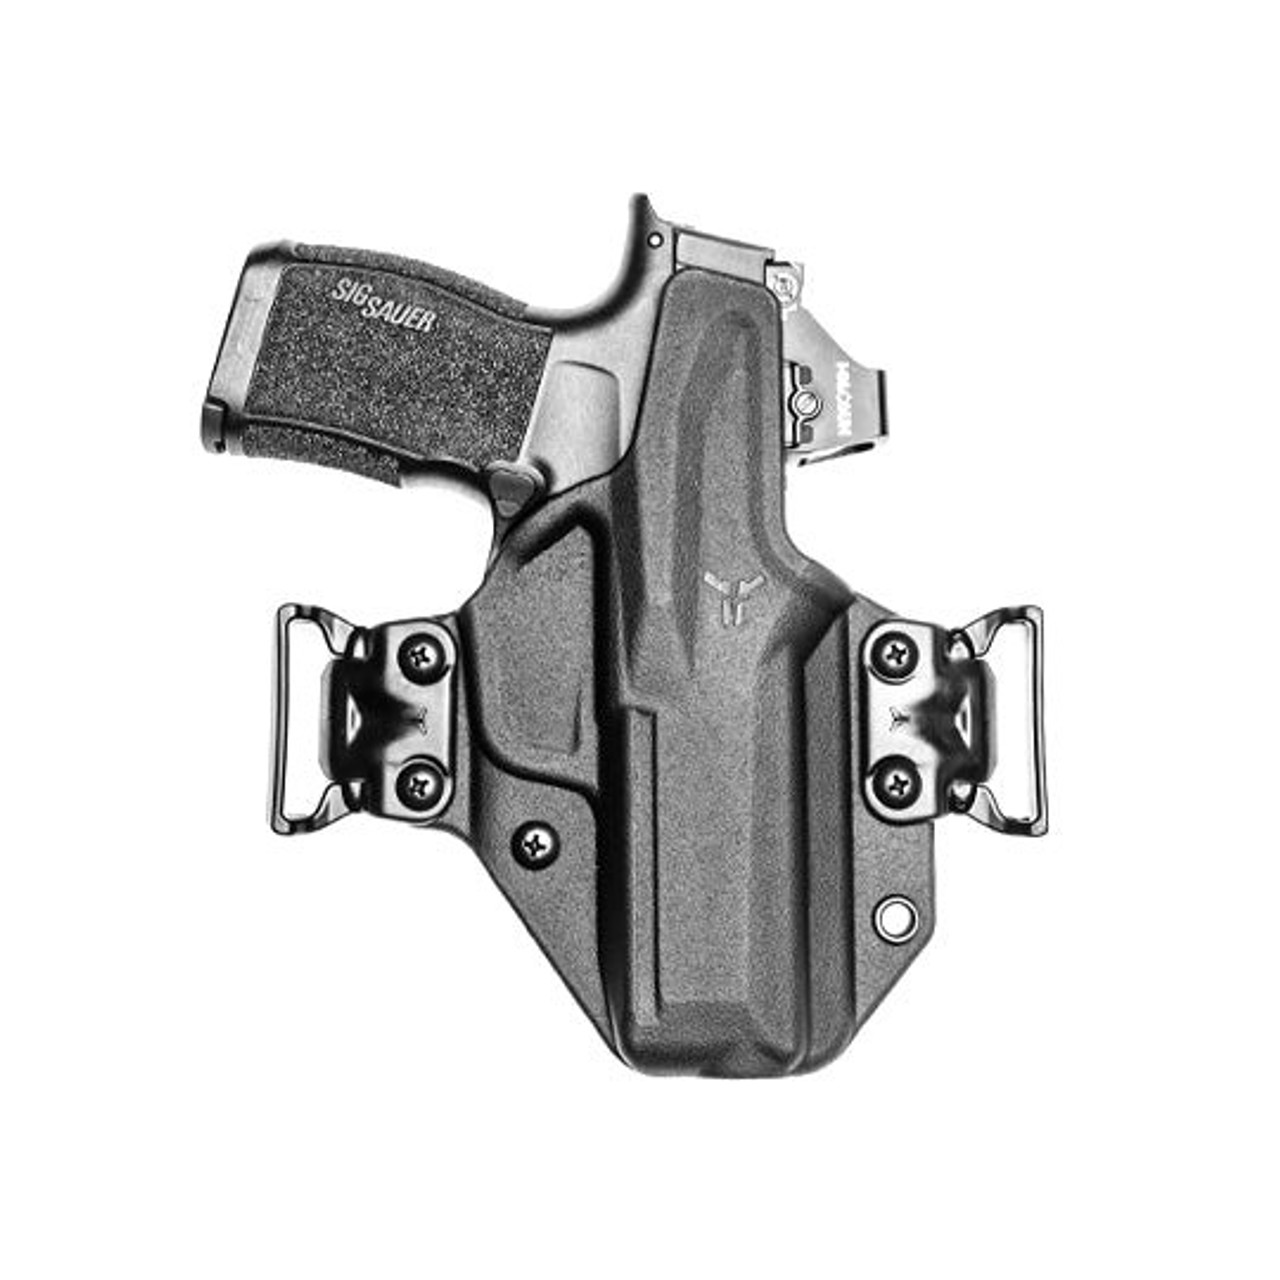 BLADE-TECH TOTAL ECLIPSE 2.0 MODULAR HOLSTER SIG P365X MACRO - Freedom  Outdoors